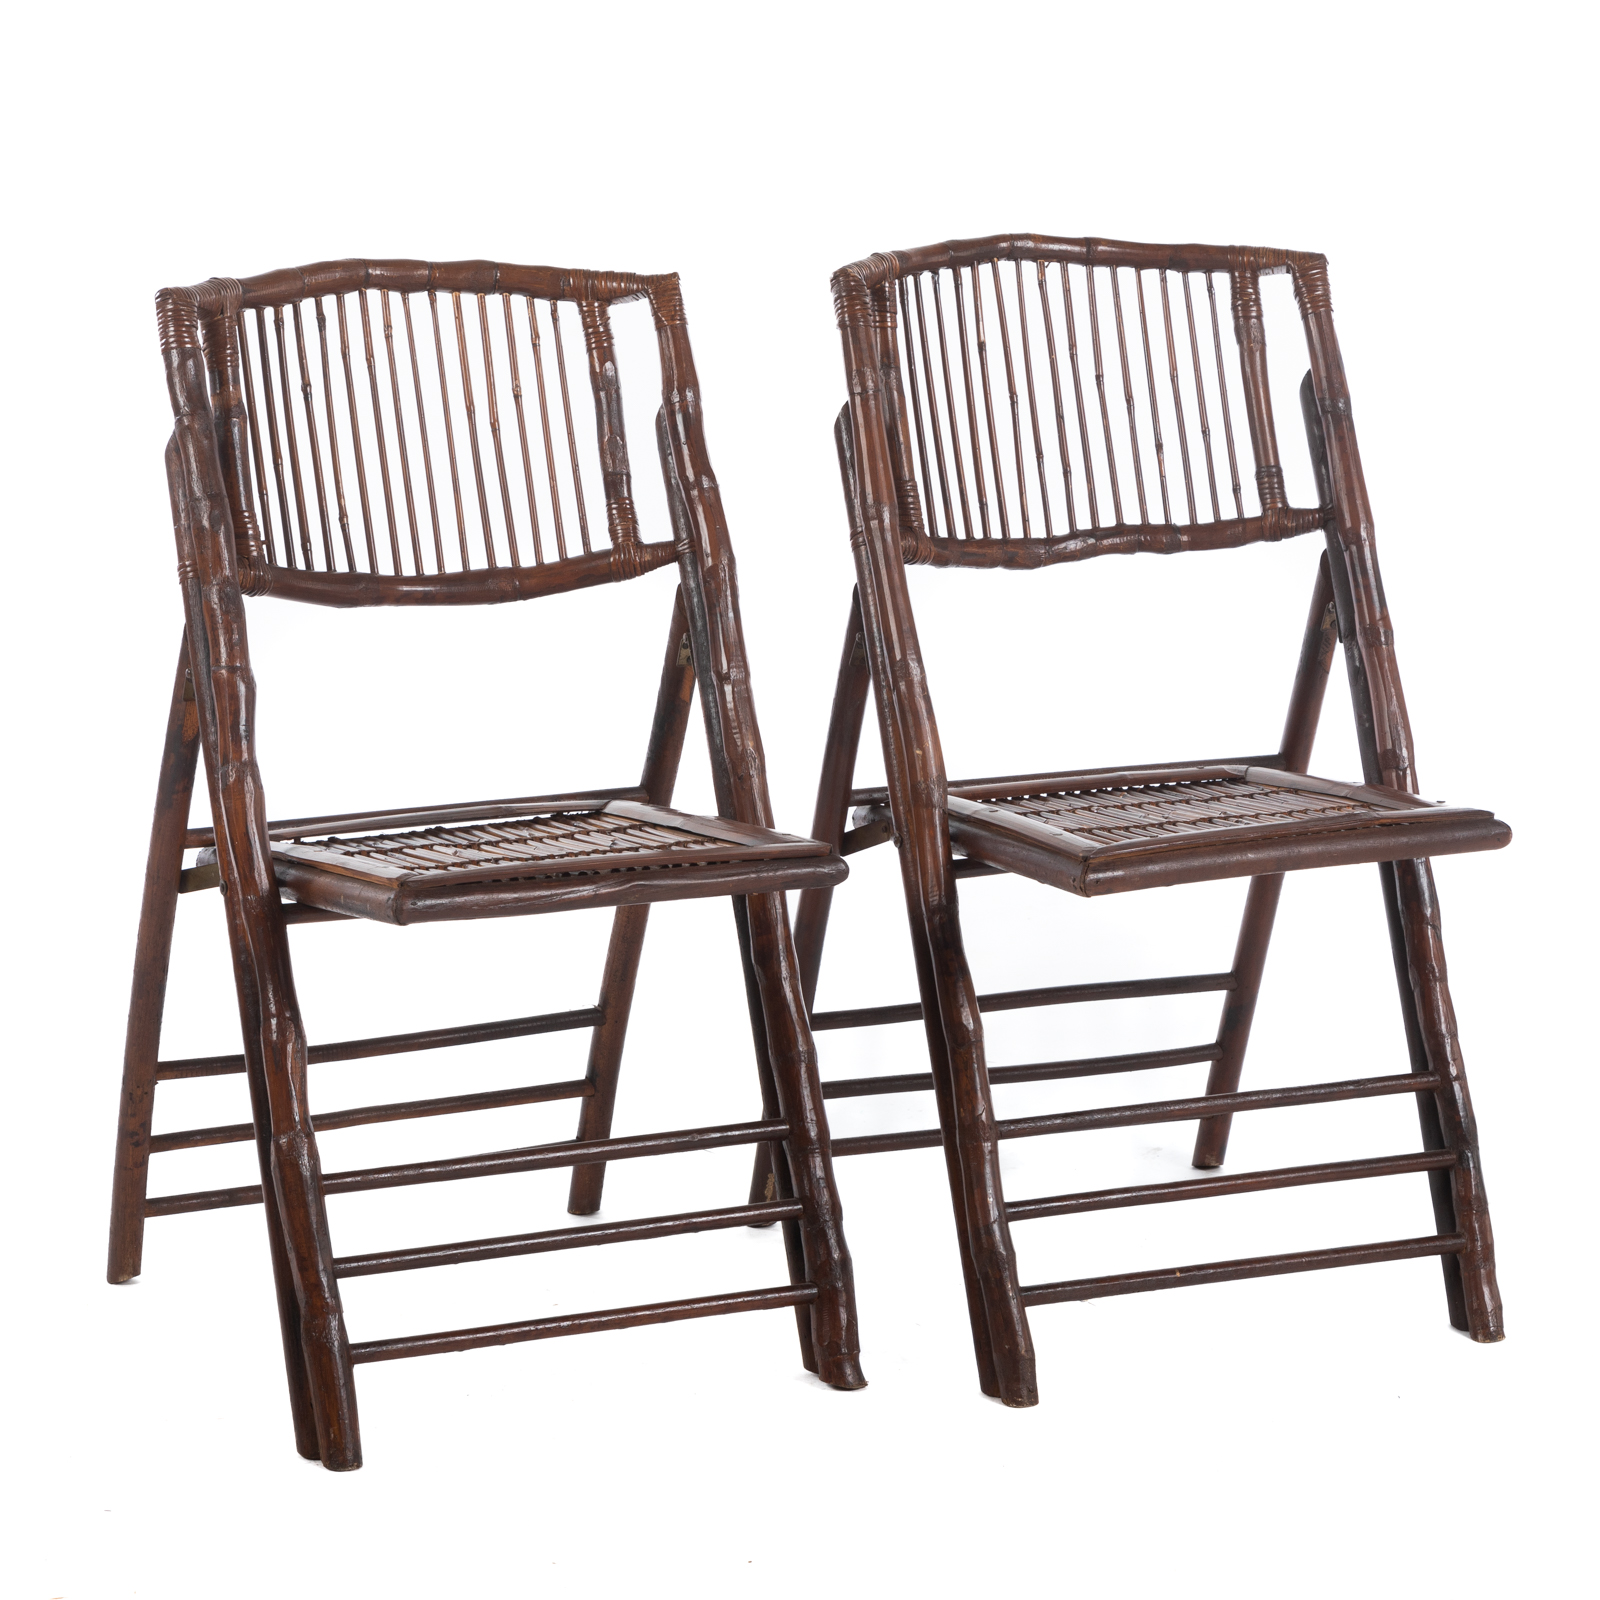 A PAIR OF FOLDING RATTAN CHAIRS